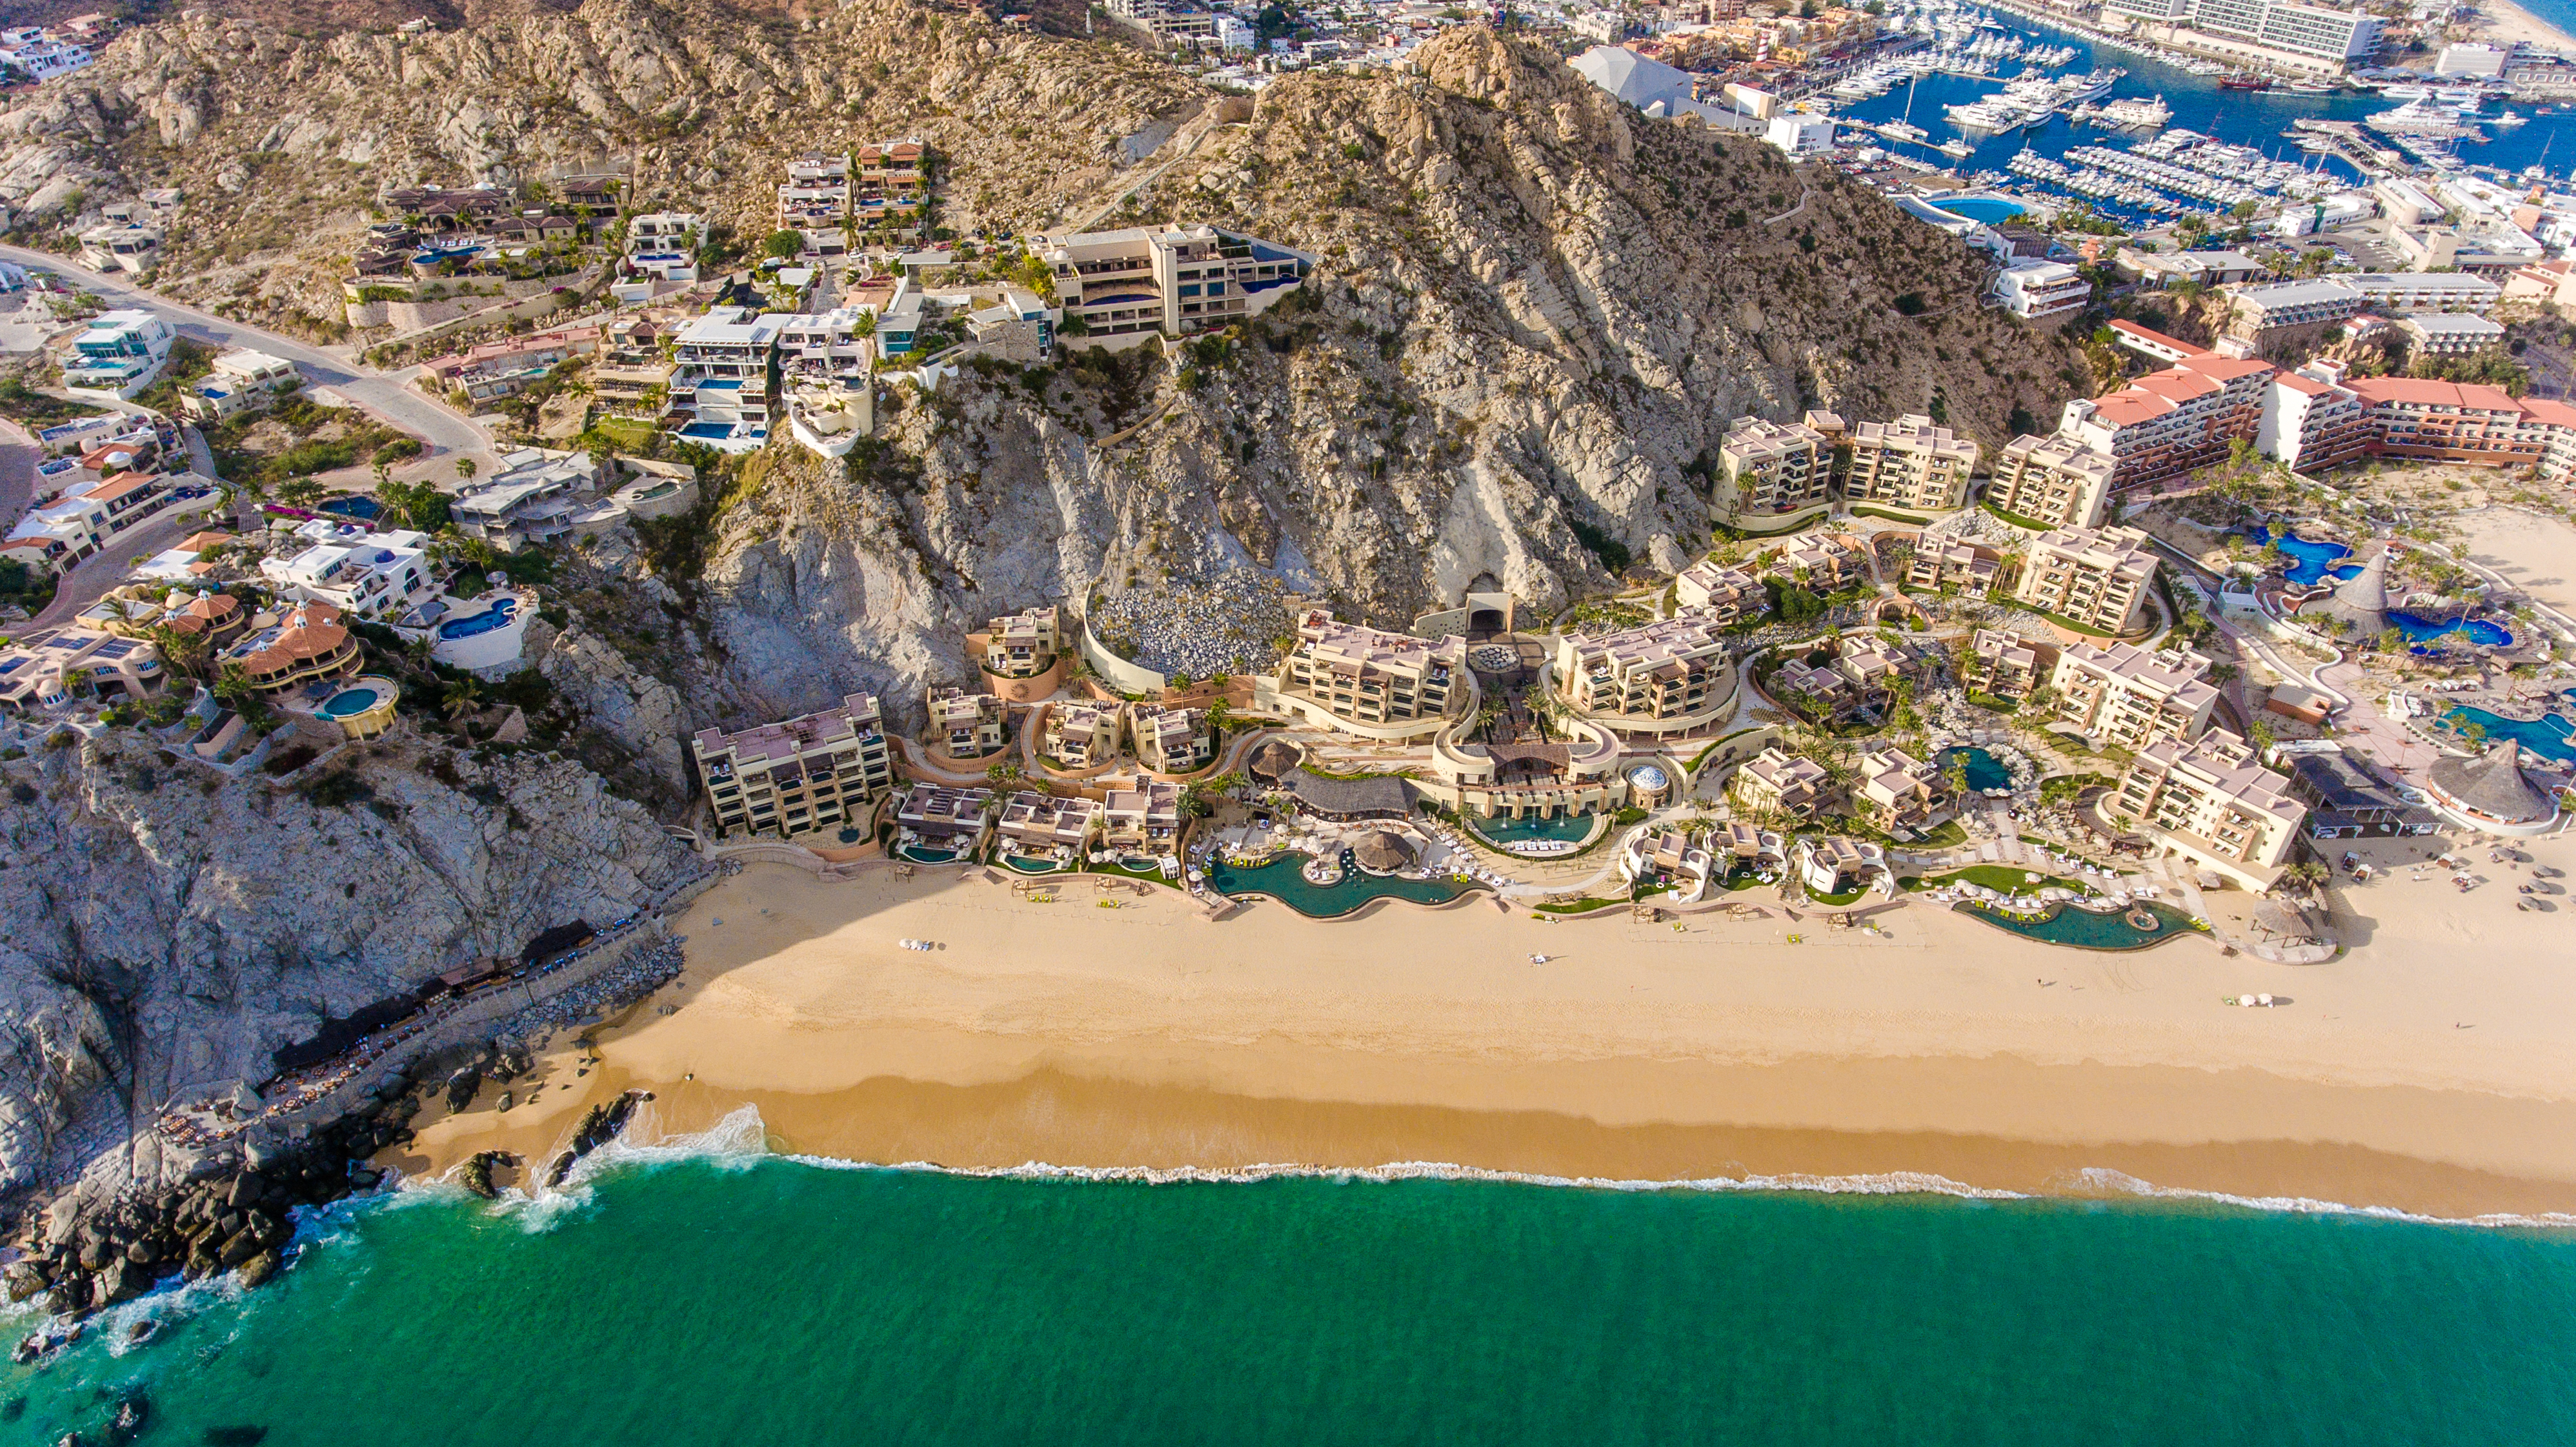 The Resort at Pedregal, a boutique hotel in Cabo San Lucas